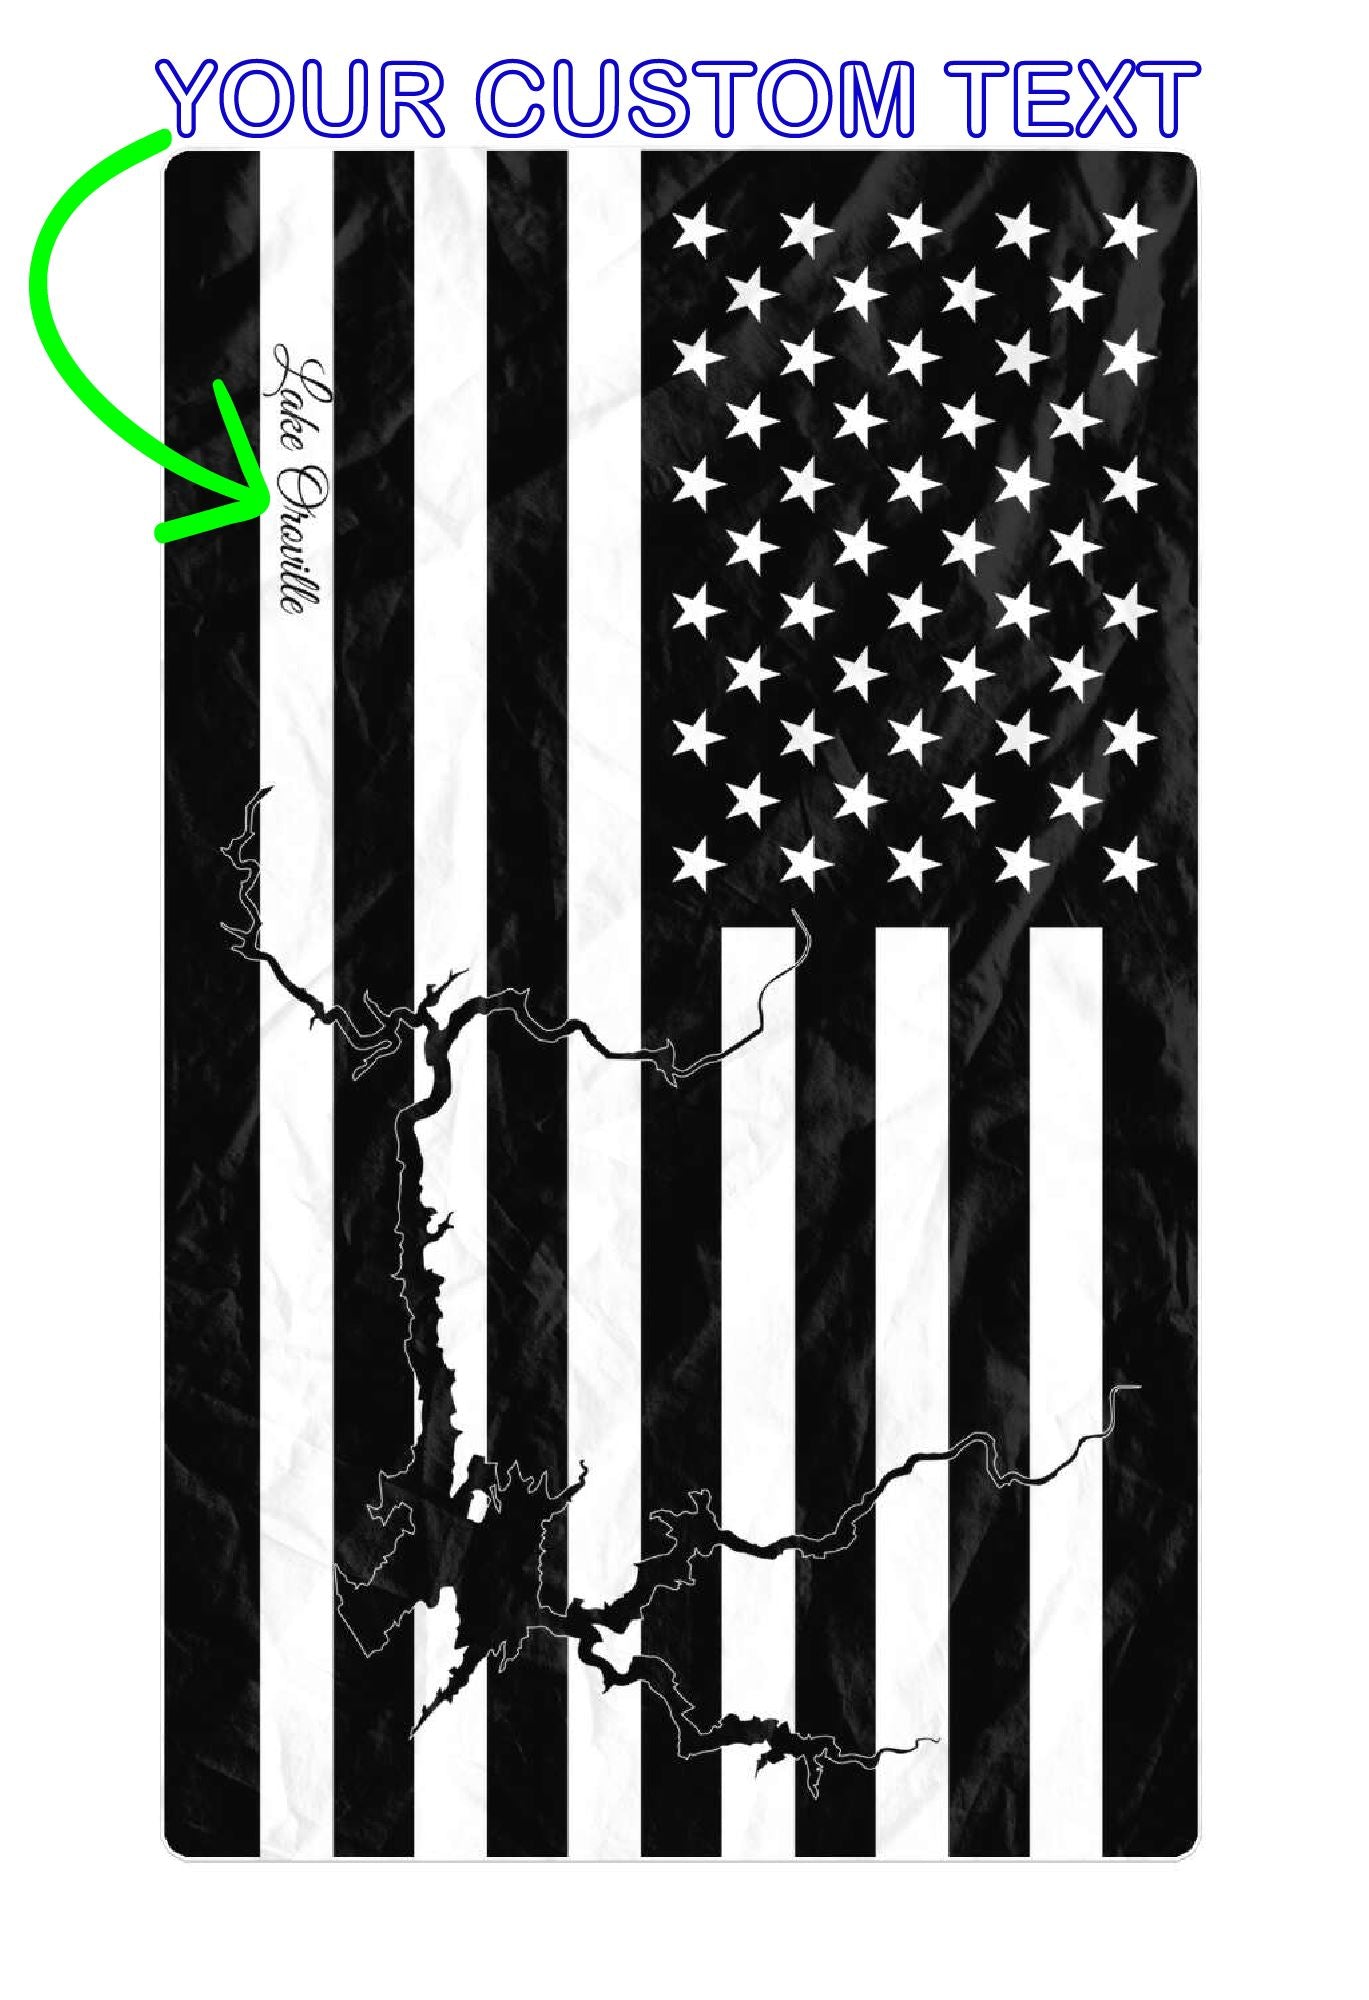 Lake Oroville Oversized Beach Towel - Black & White – Personalized Freeform Beach Towel - AOP 